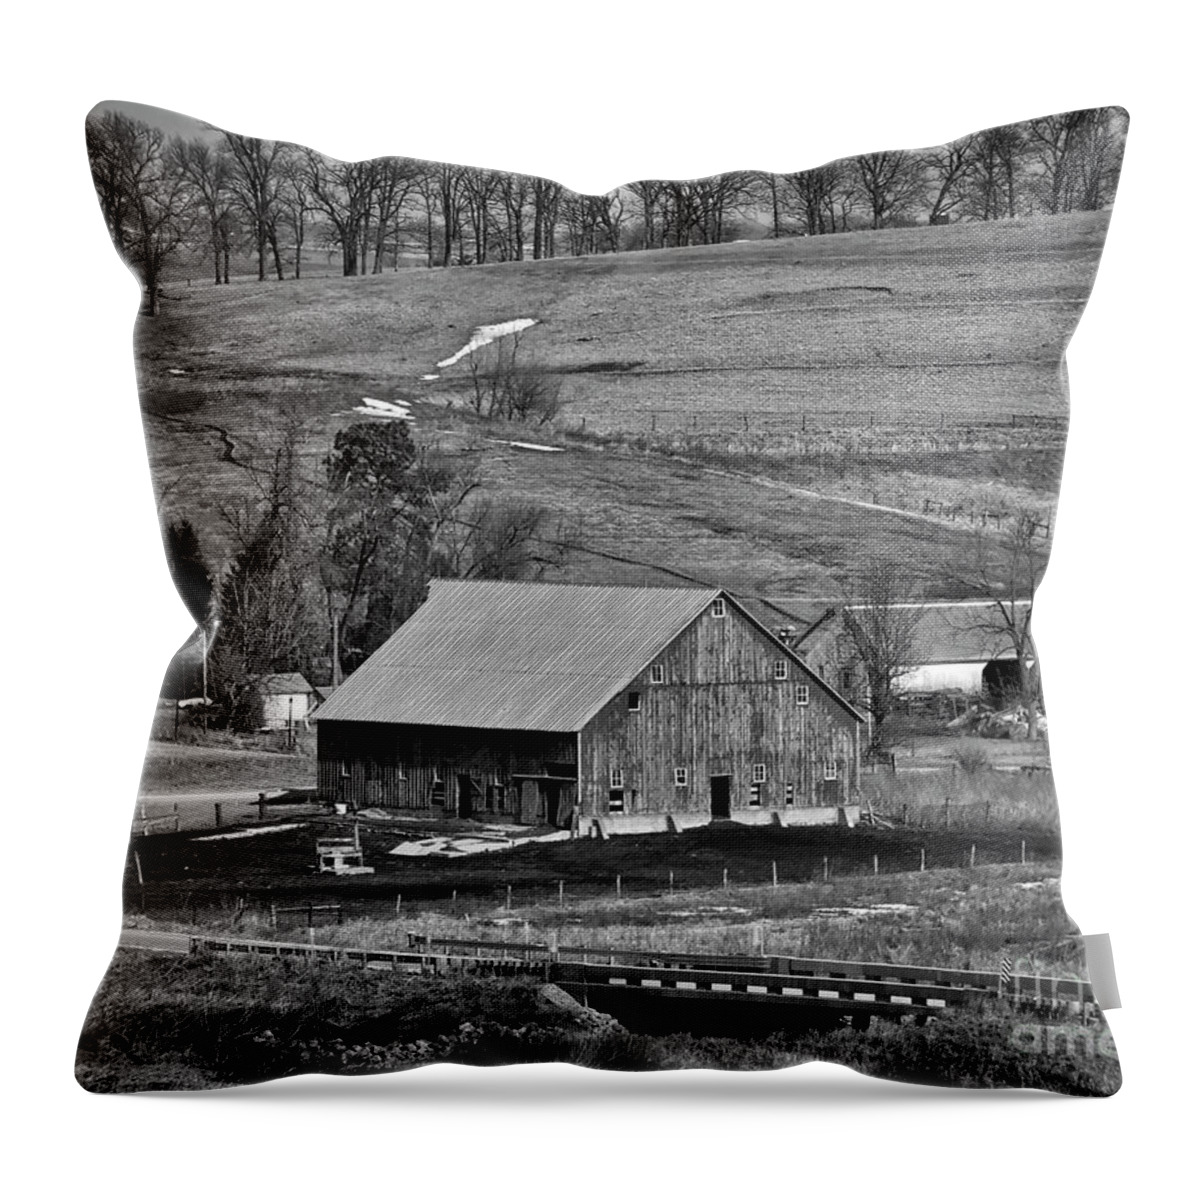 Farms Throw Pillow featuring the digital art Barn In The Valley by Kirt Tisdale